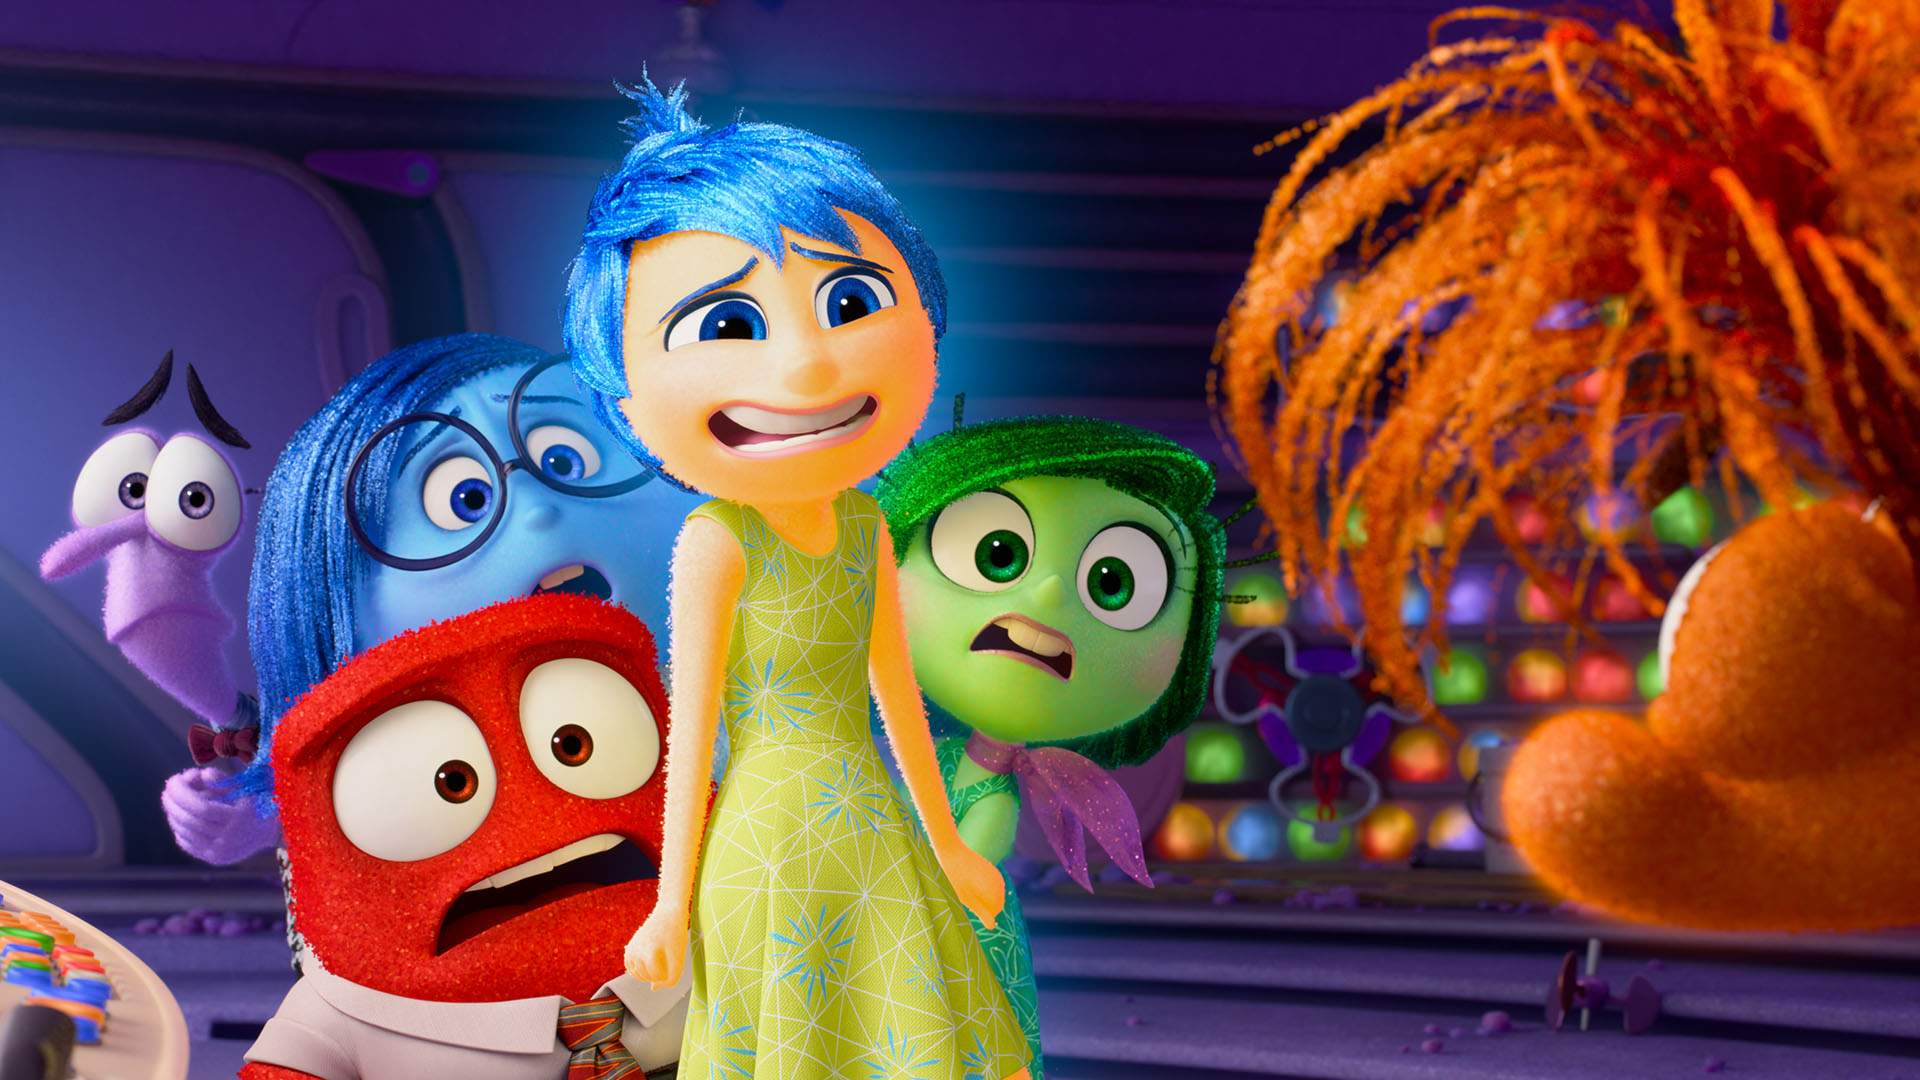 Joy and the Gang Are Joined by a New Emotion in the First Teaser Trailer for Pixar's 'Inside Out 2'